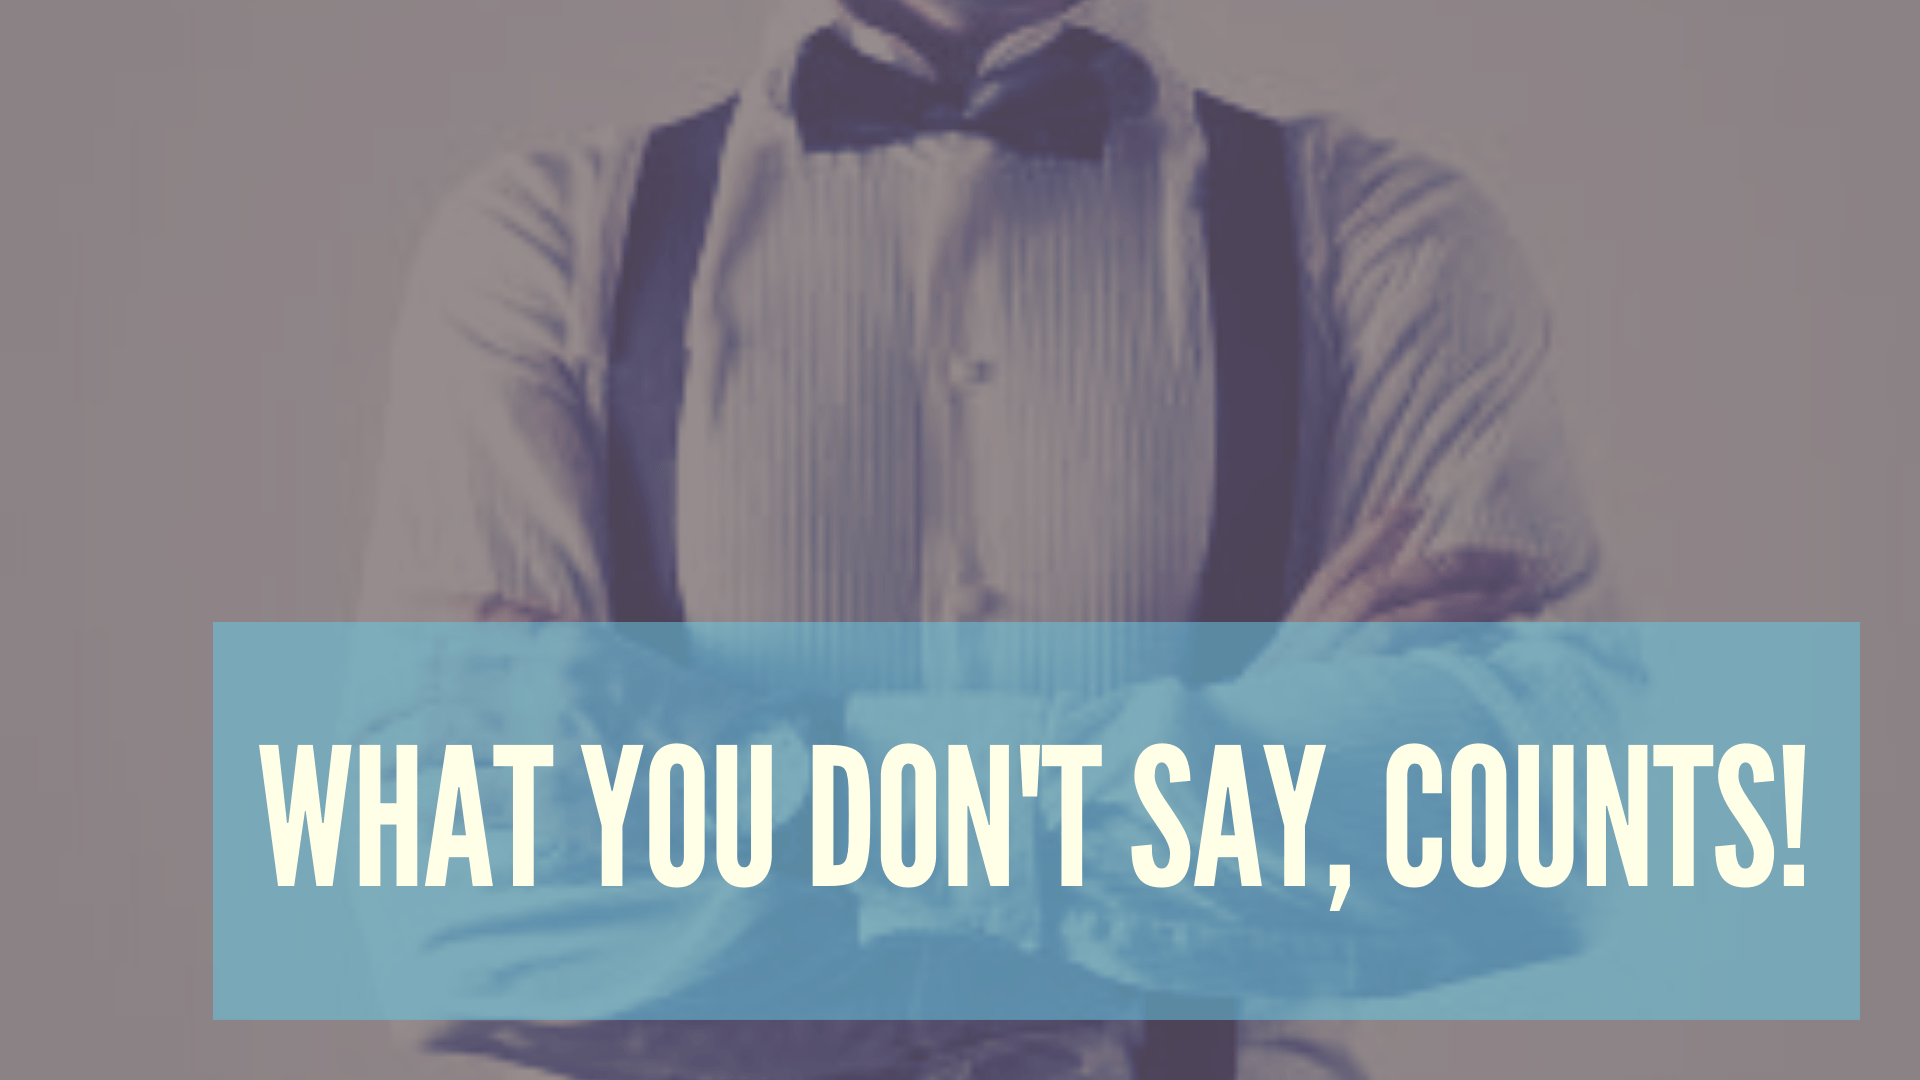 Confidently Speaking: Mastering Body Language for Professional Success